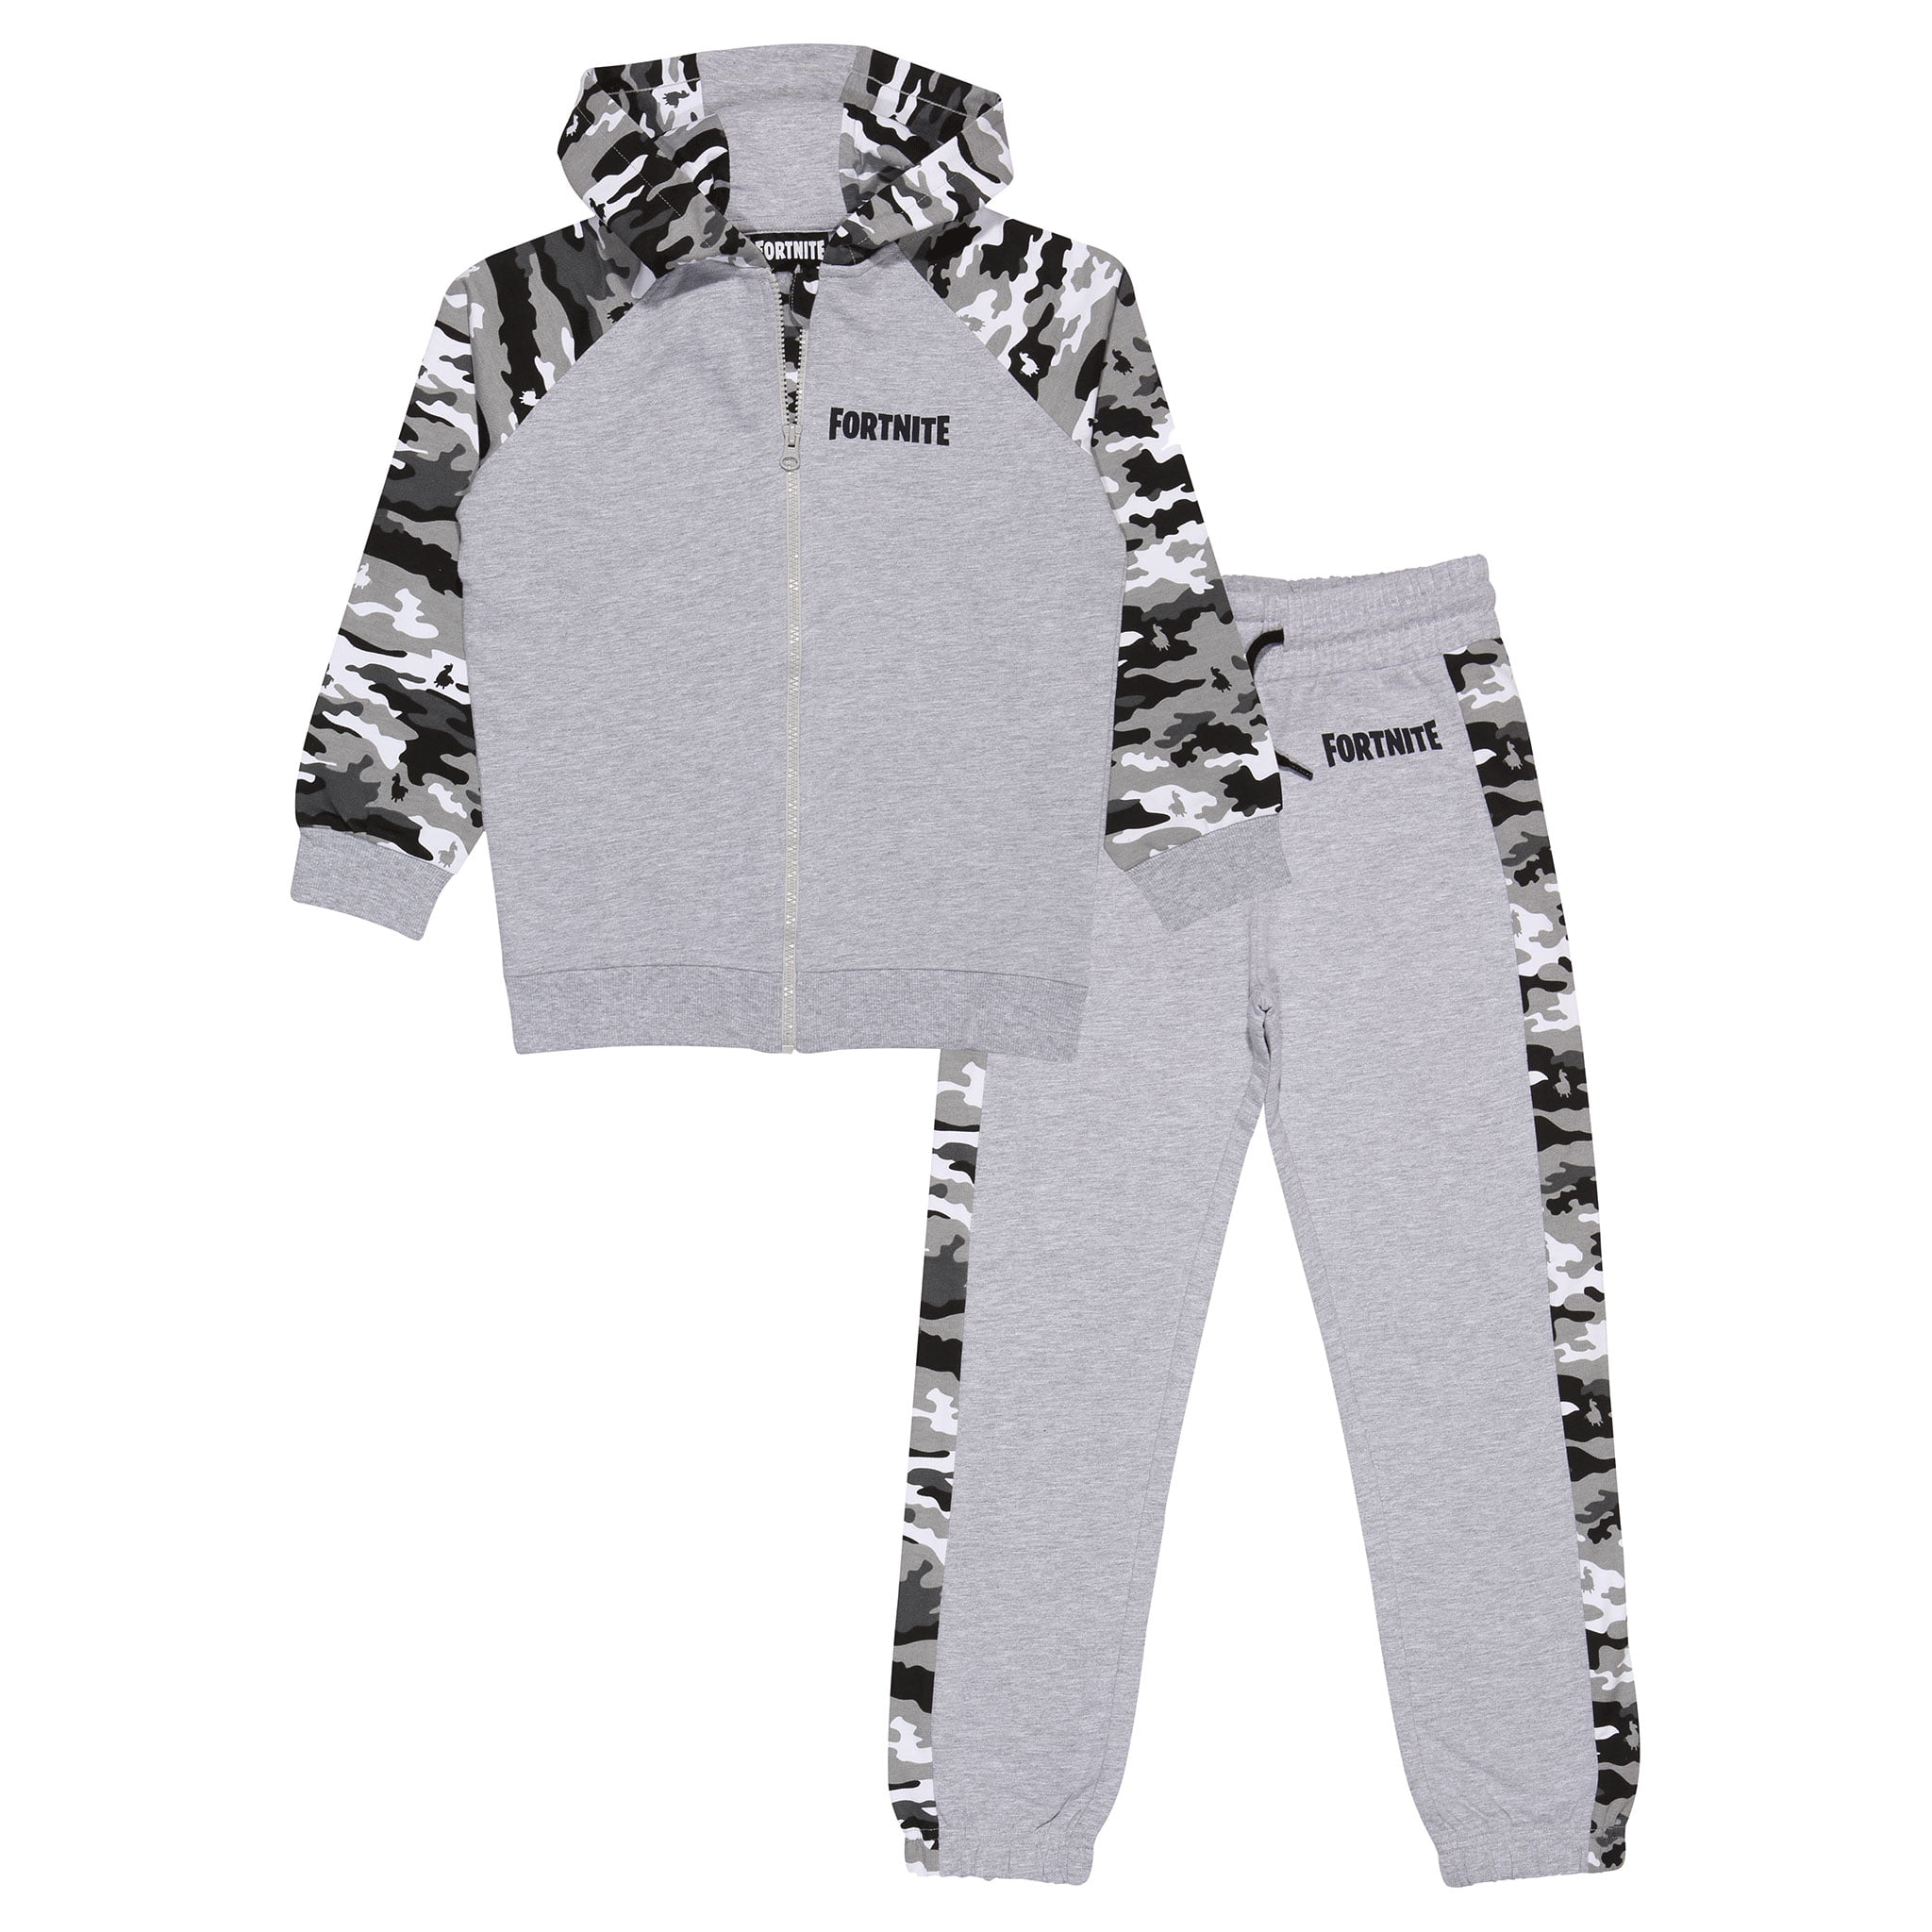 Official Merchandise Tracksuit Gift Idea for Boys Fortnite Camo Emotes Boys Hoodie and Joggers Set 